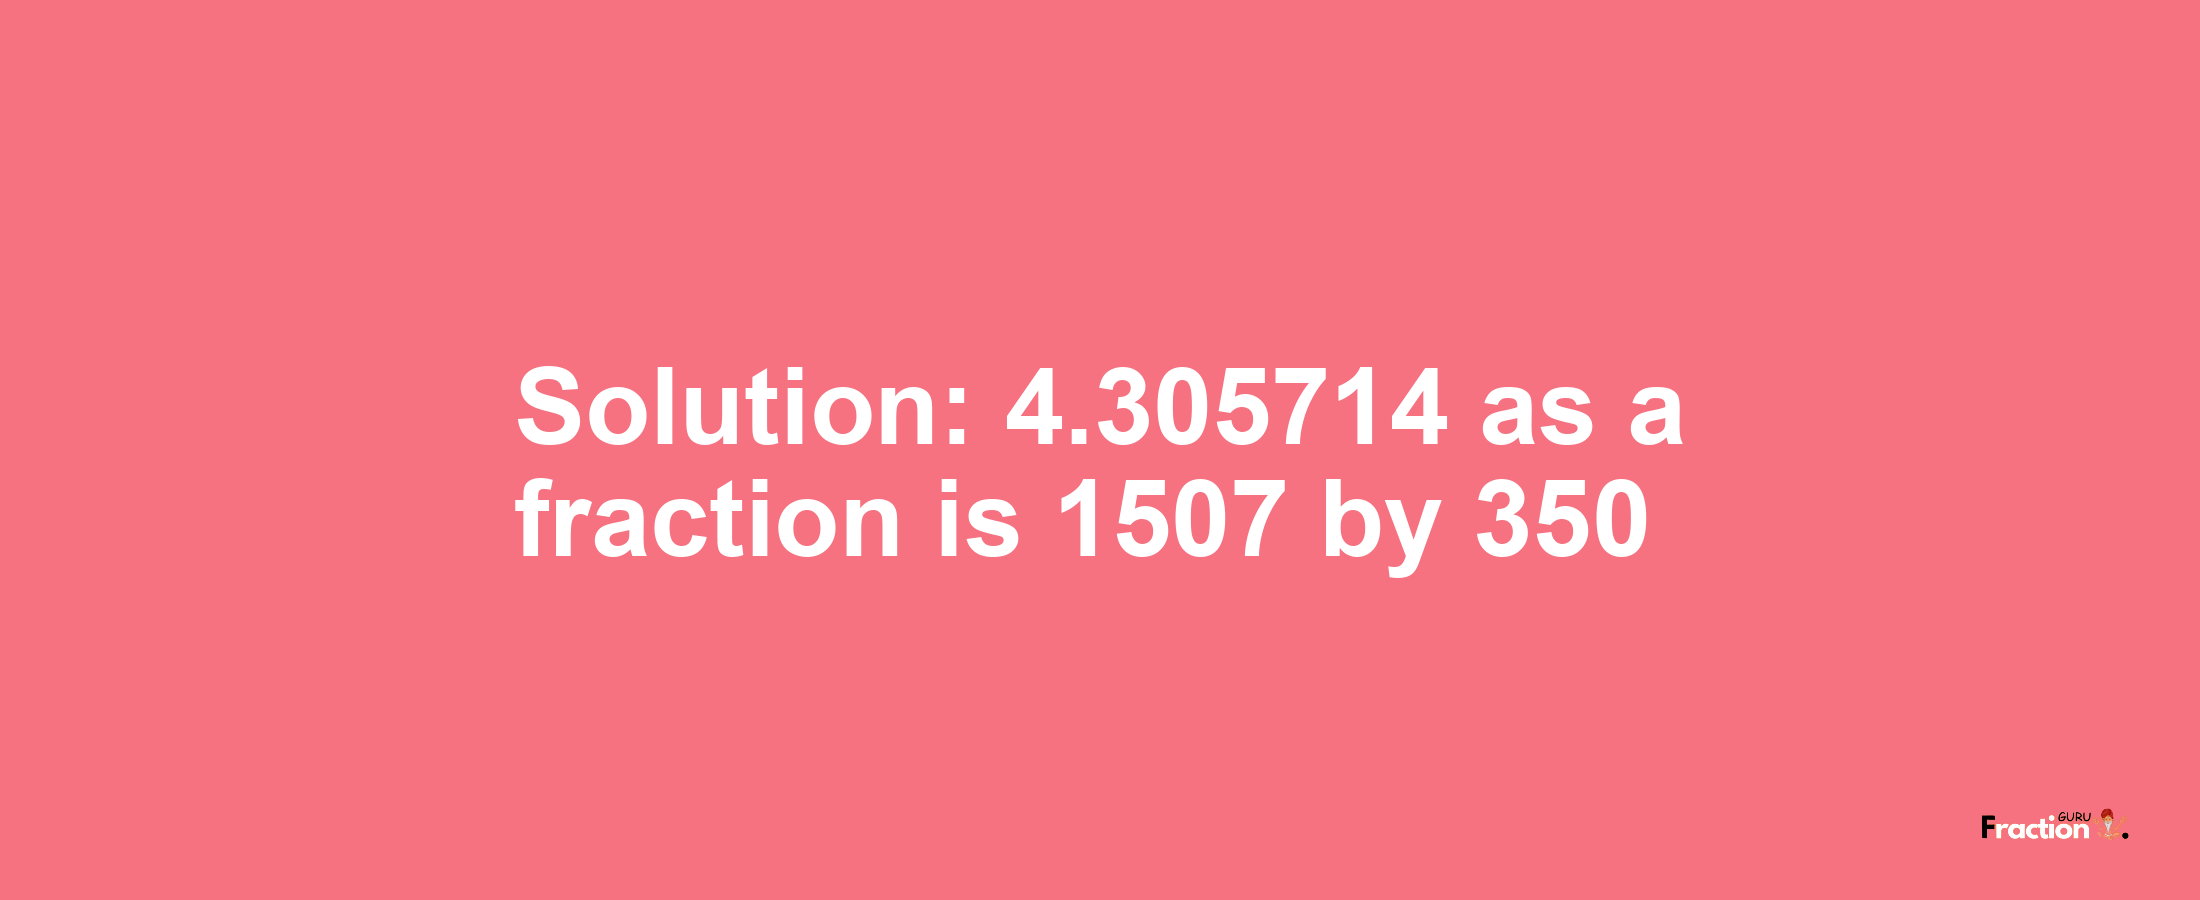 Solution:4.305714 as a fraction is 1507/350